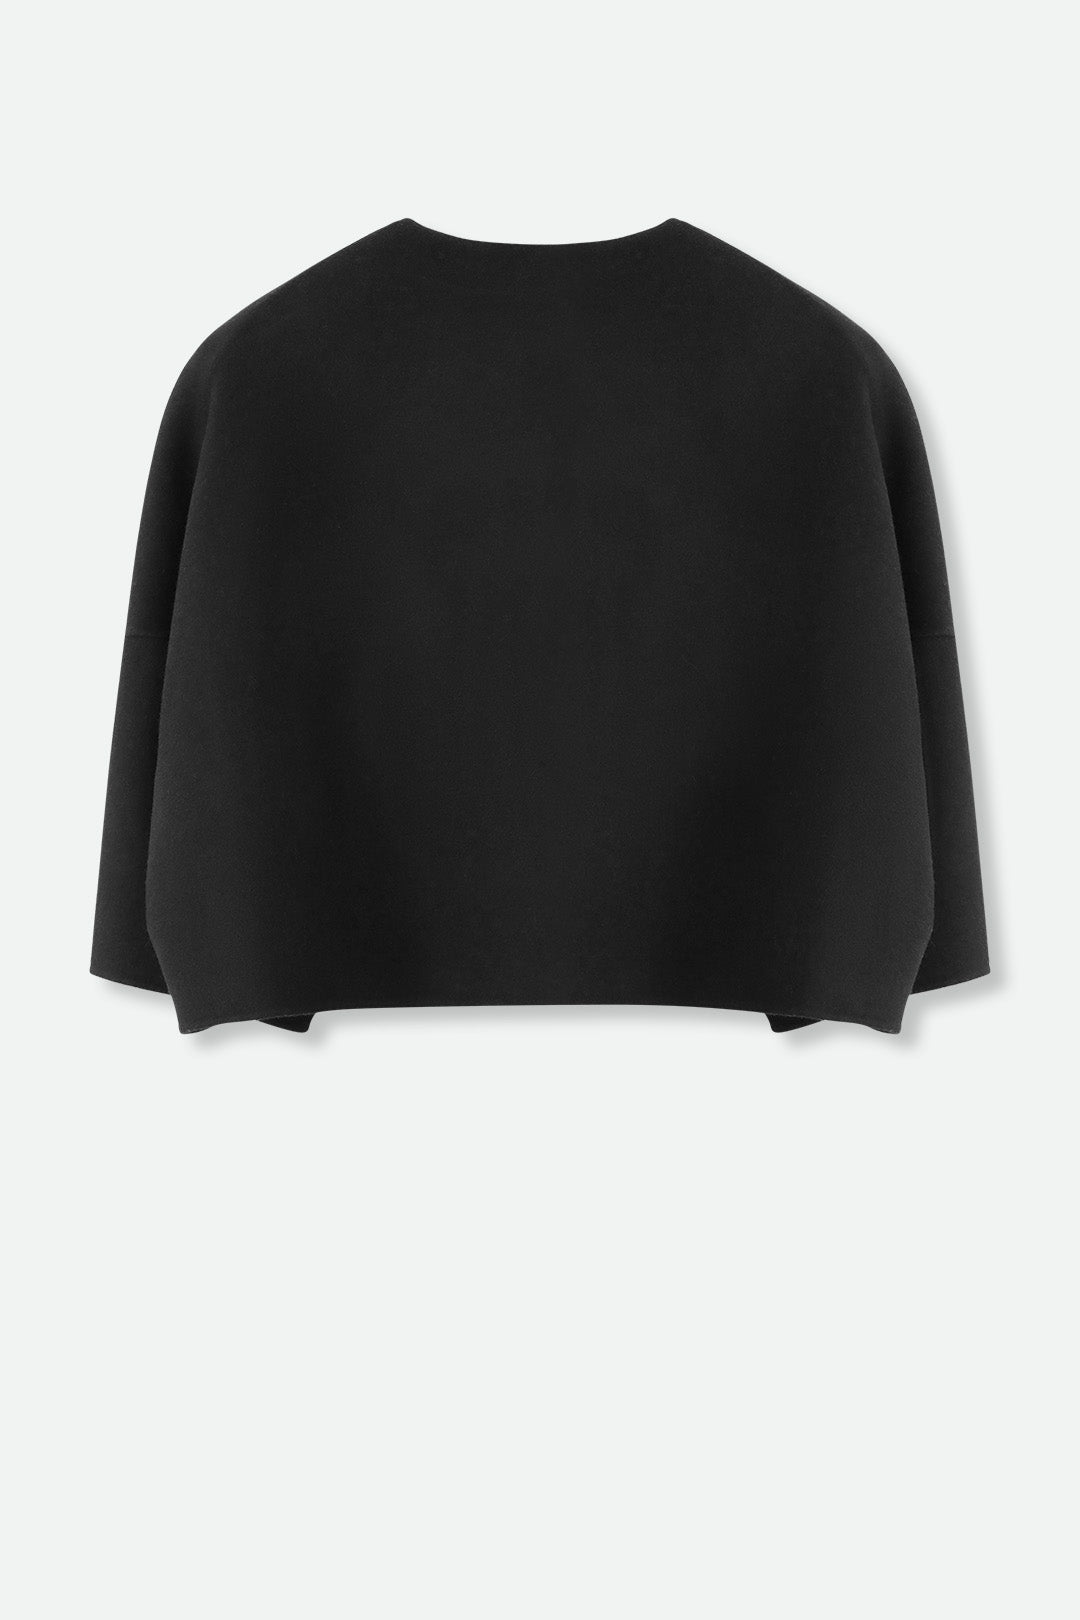 ADELAIDE SNAP JACKET IN DOUBLE-FACE CASHMERE WOOL - Jarbo